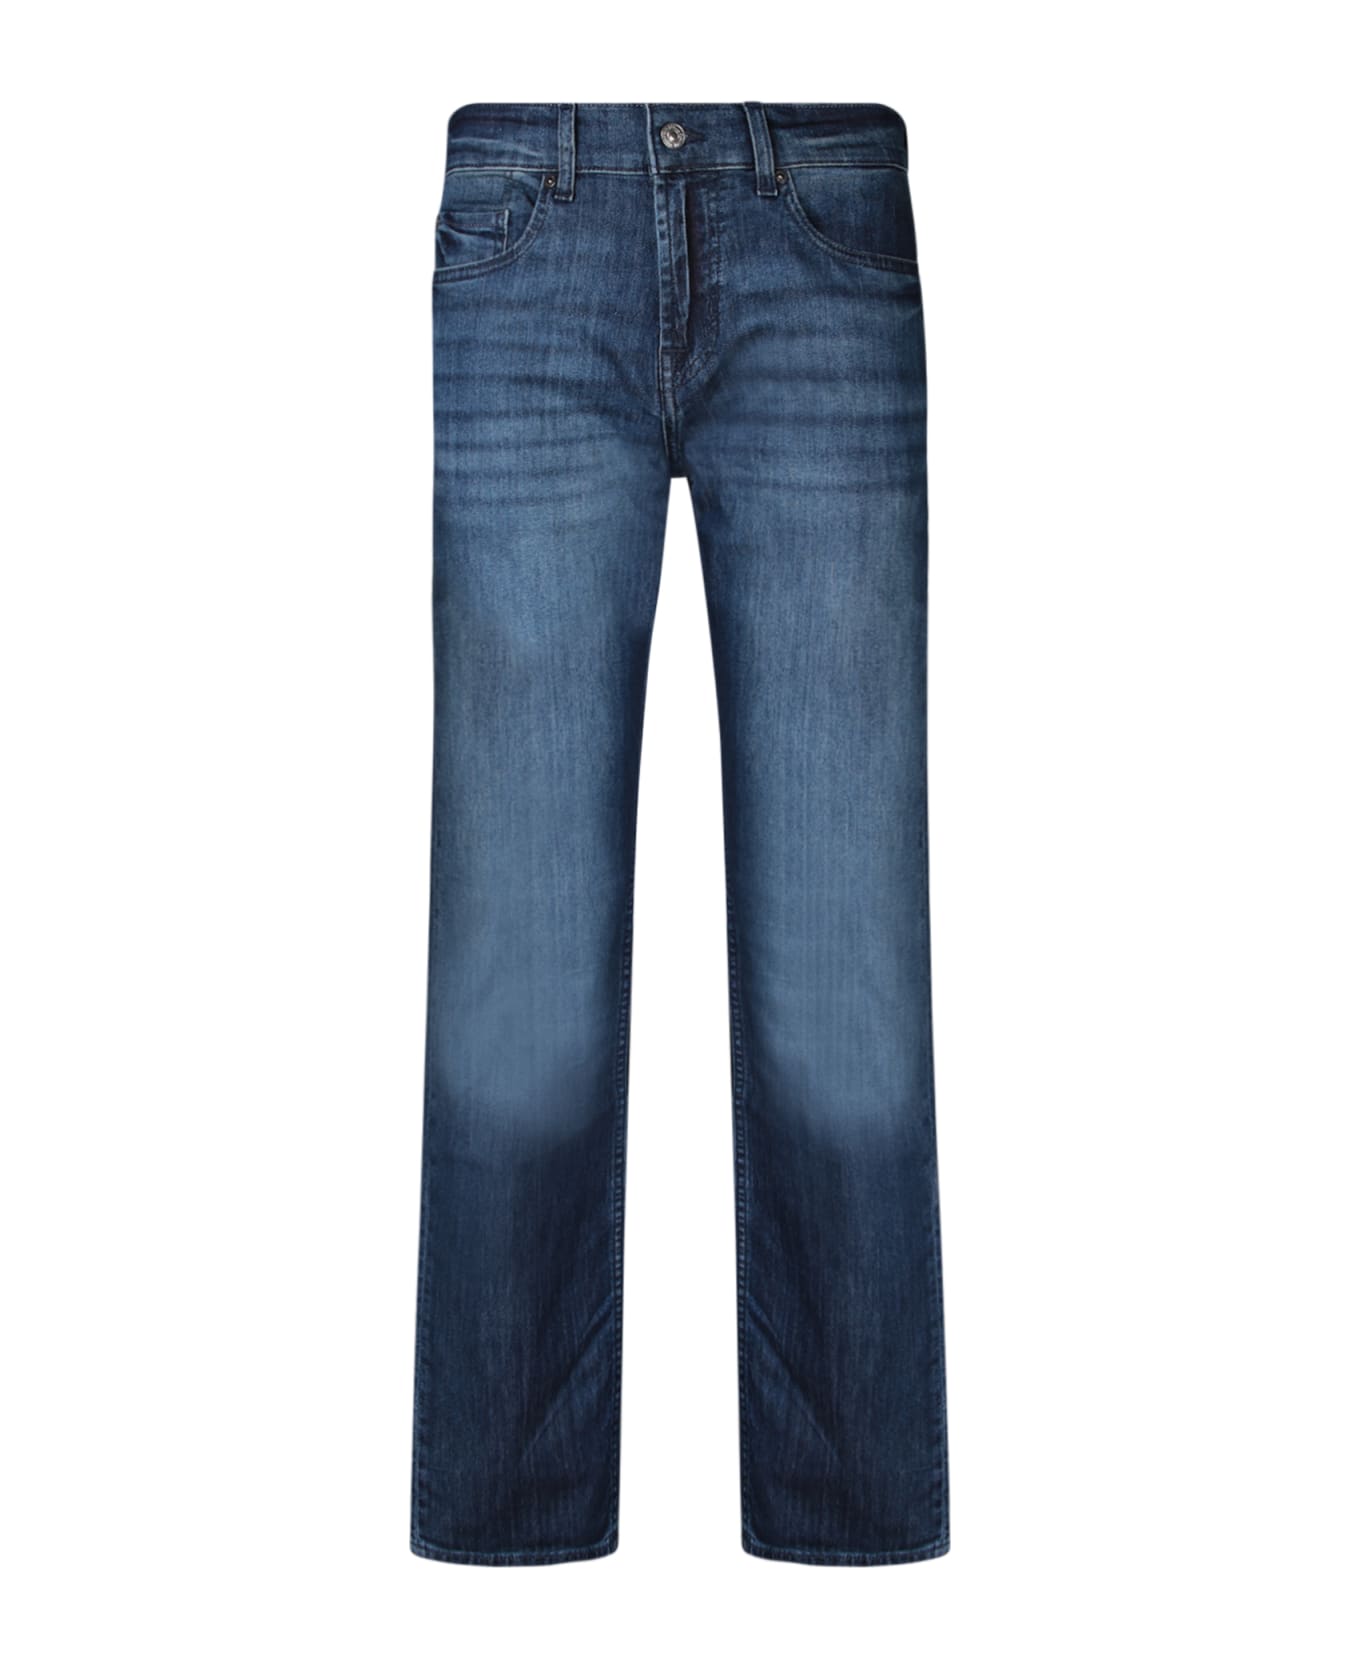 7 For All Mankind Austyn Headway Blue Jeans - Blue デニム